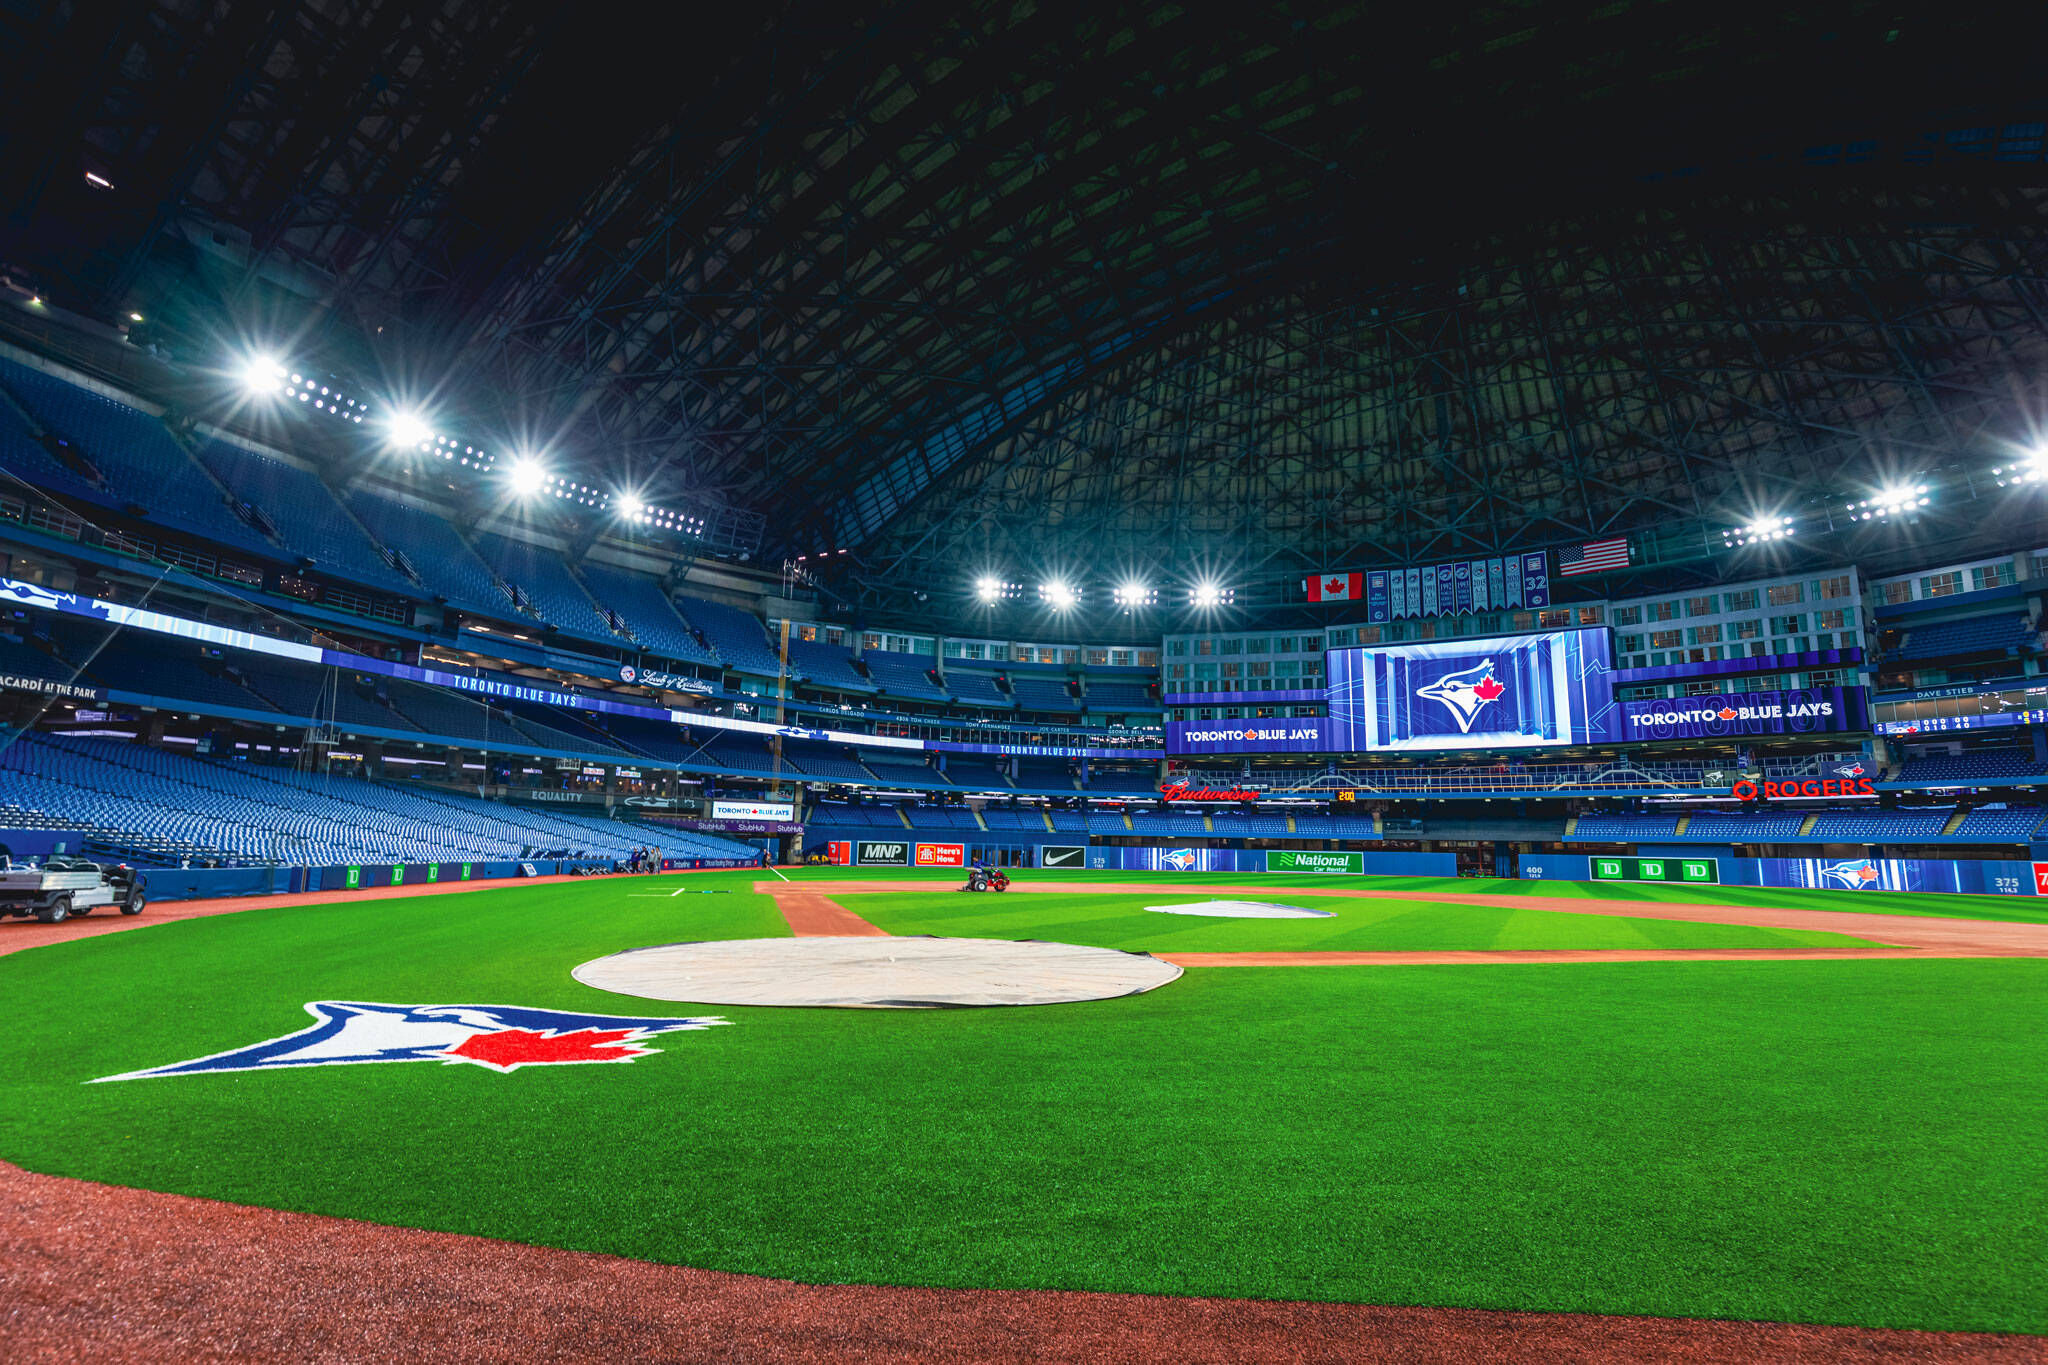 Toronto Blue Jays fan has hilarious sign confiscated by Rogers Centre staff